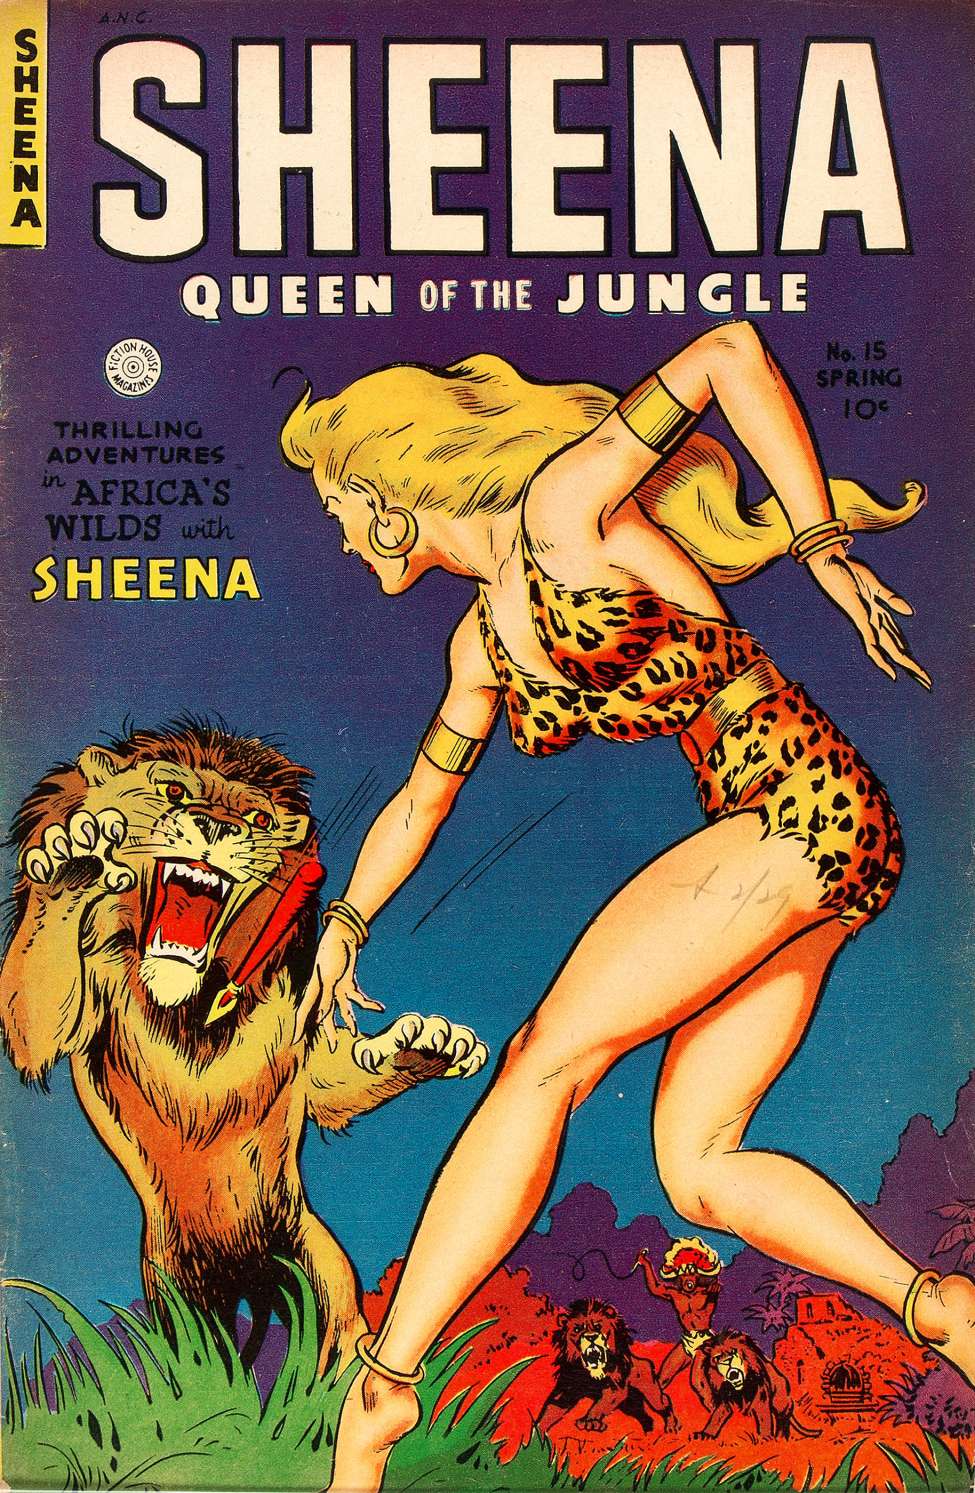 Comic Book Cover For Sheena, Queen of the Jungle 15 - Version 2